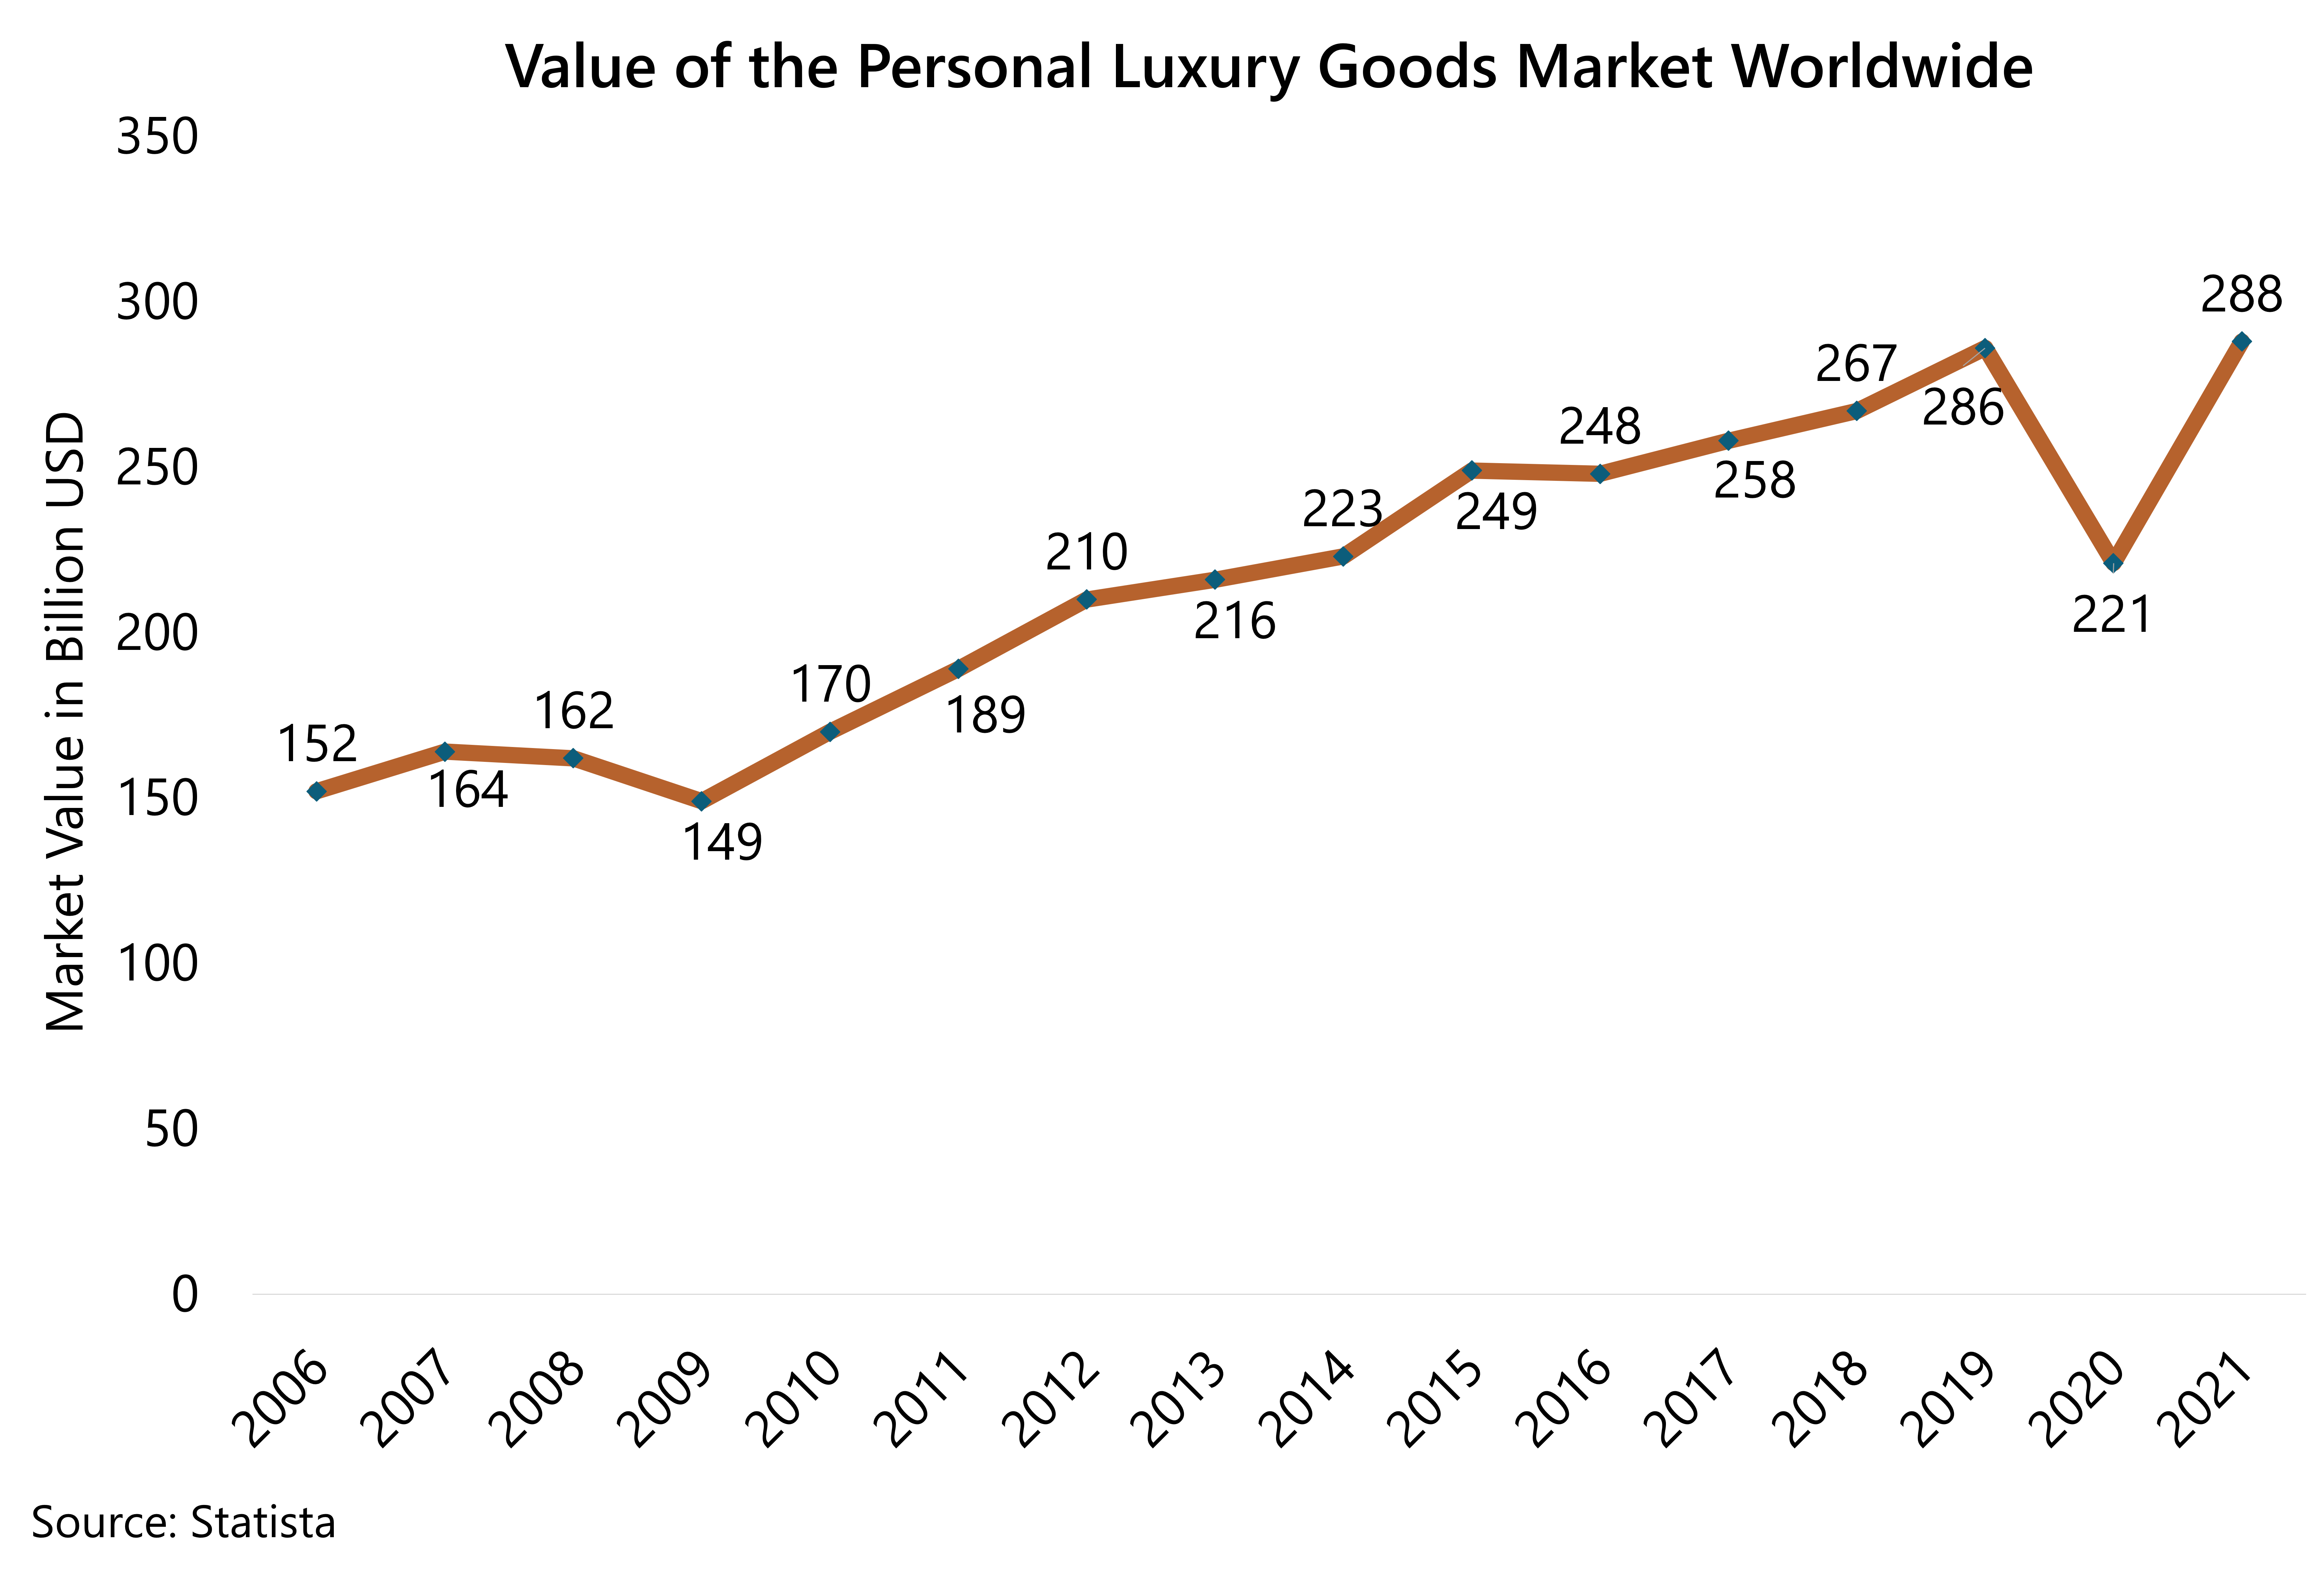 Progression of the global personal luxury goods market in Billion USD (2006 to 2021) to help you understand prestige pricing.